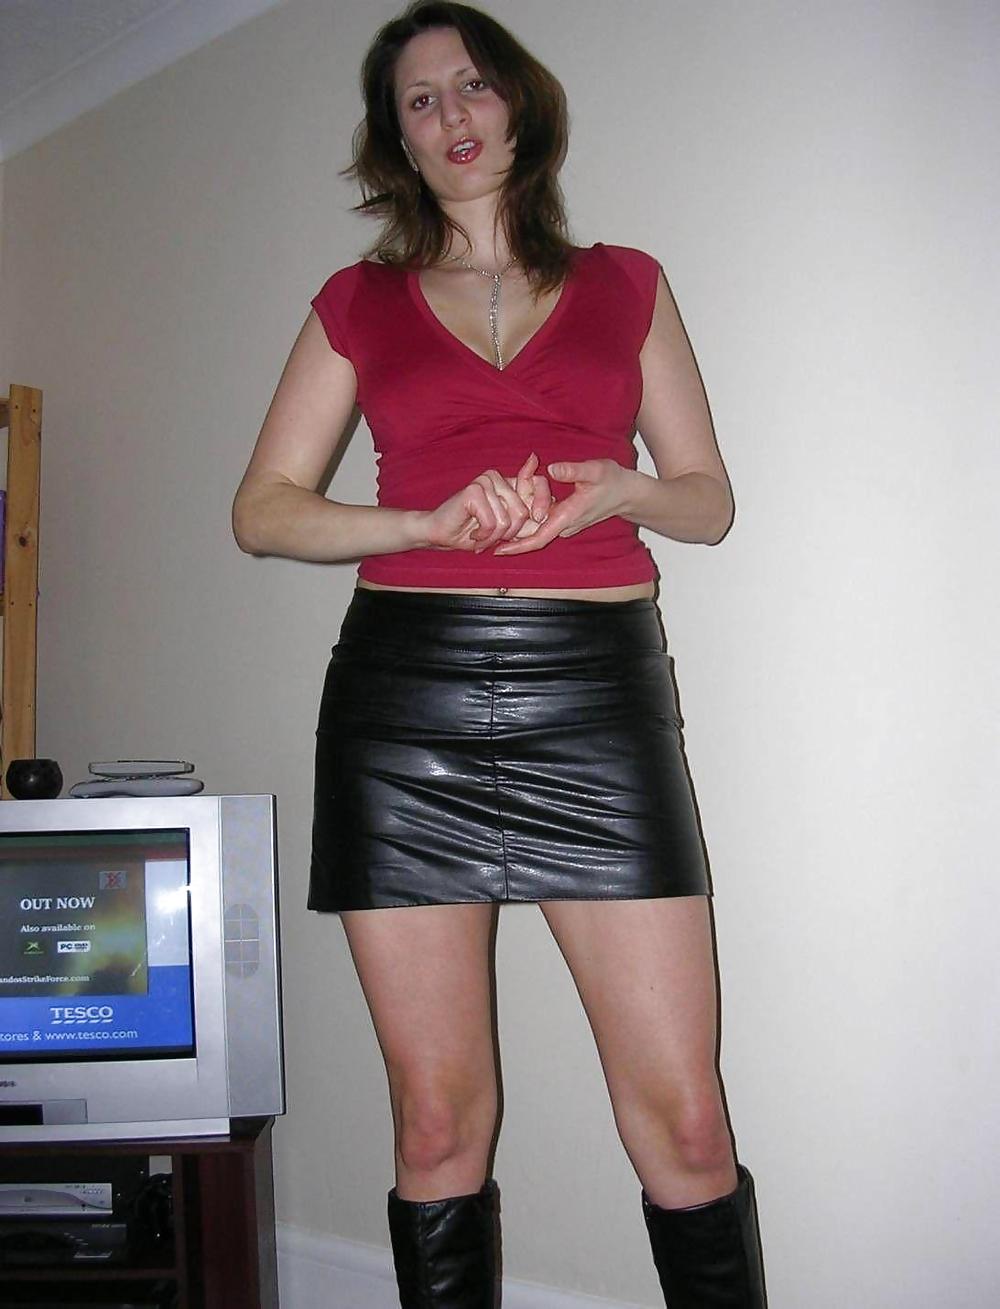 Sex hotlegs-latex and leather skirt amateurs image 9488409 picture